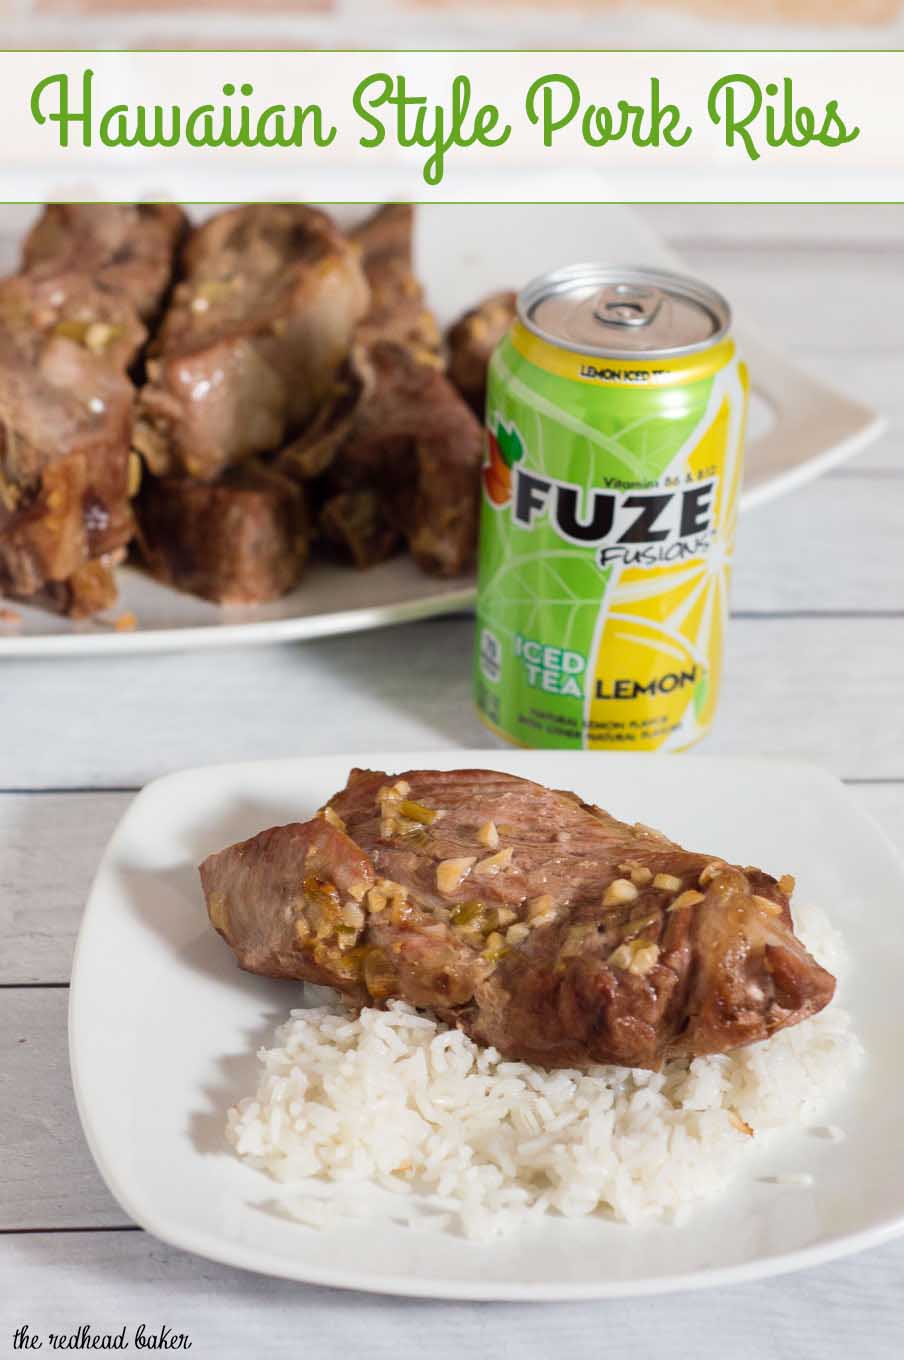 Nothing says summer more than pork ribs marinated in Hawaiian flavors like pineapple juice, soy sauce and ginger. This recipe will easily feeds the crowd at your next summer get-together. #SummerRefreshment #Peapod